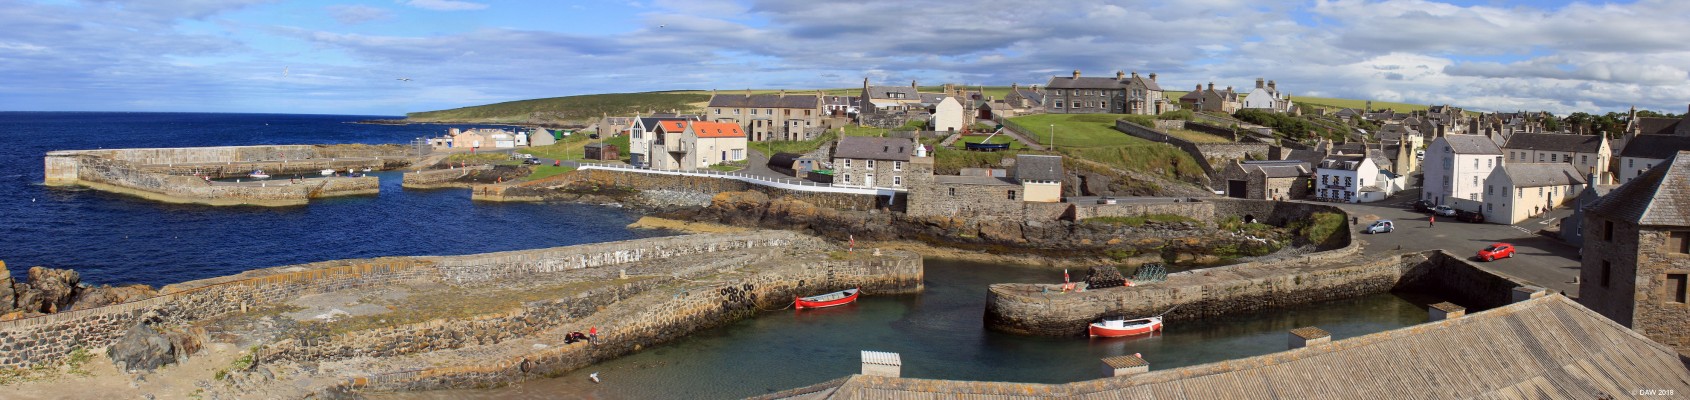 Portsoy Harbour area
A view of the two harbours at Portsoy.  On the right is the old harbour which dates from the 17th century and is the oldest on the Moray Firth.  On the left in the background is the "new" harbour which dates from 1825, it was built for the herring fleet which at its peak was a fleet of 57 boats. [url=http://streetmap.co.uk/map.srf?X=358863&Y=866404&A=Y&Z=115/] Map location. [/url]
